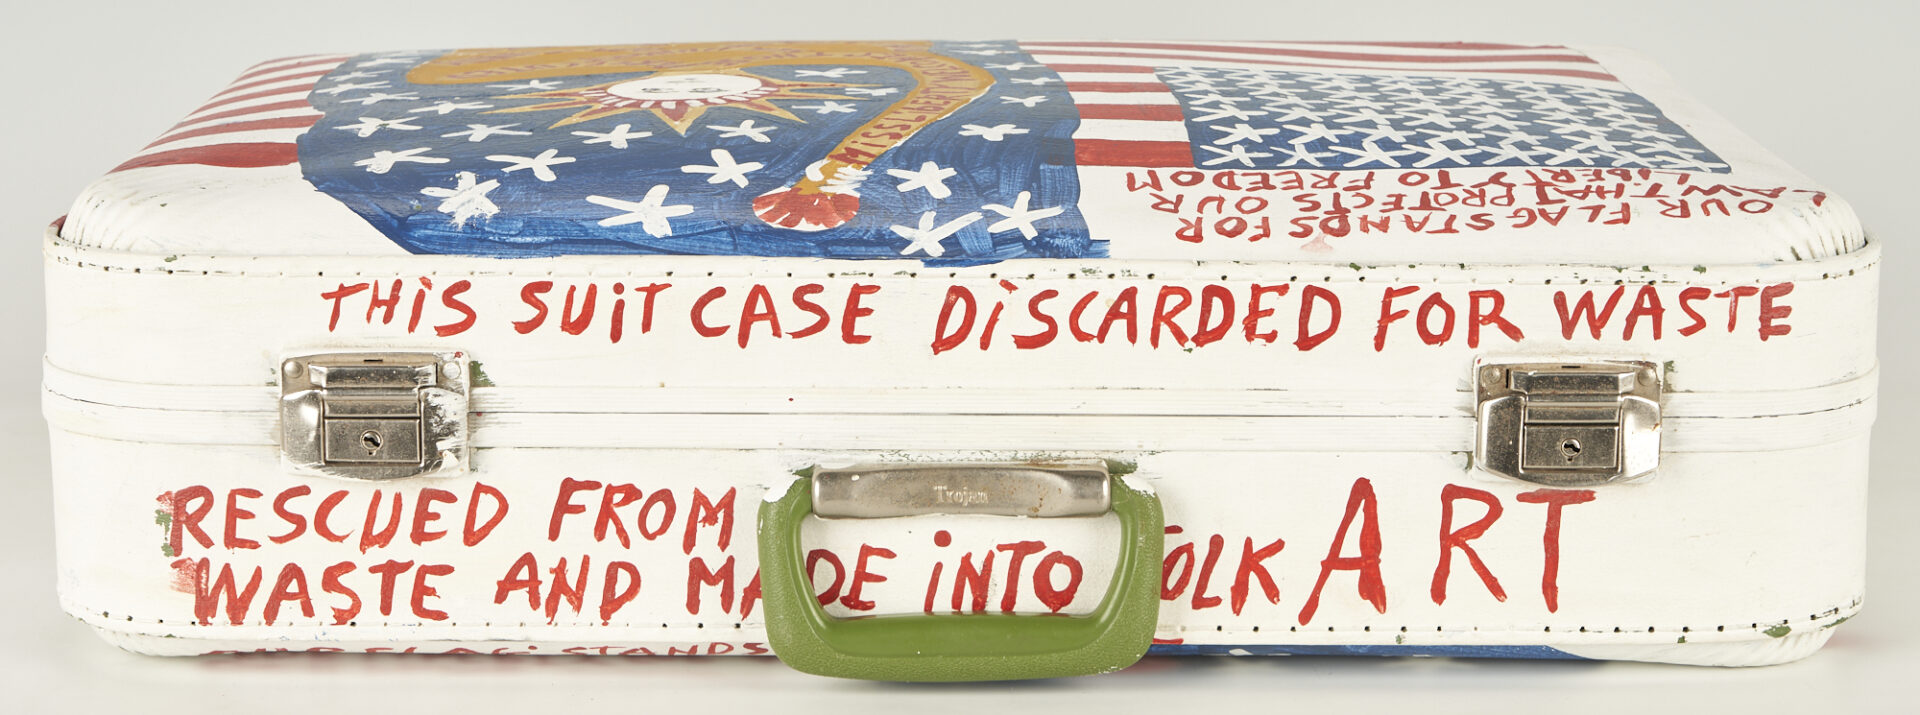 Lot 326: B.F. Perkins, All American Suitcase